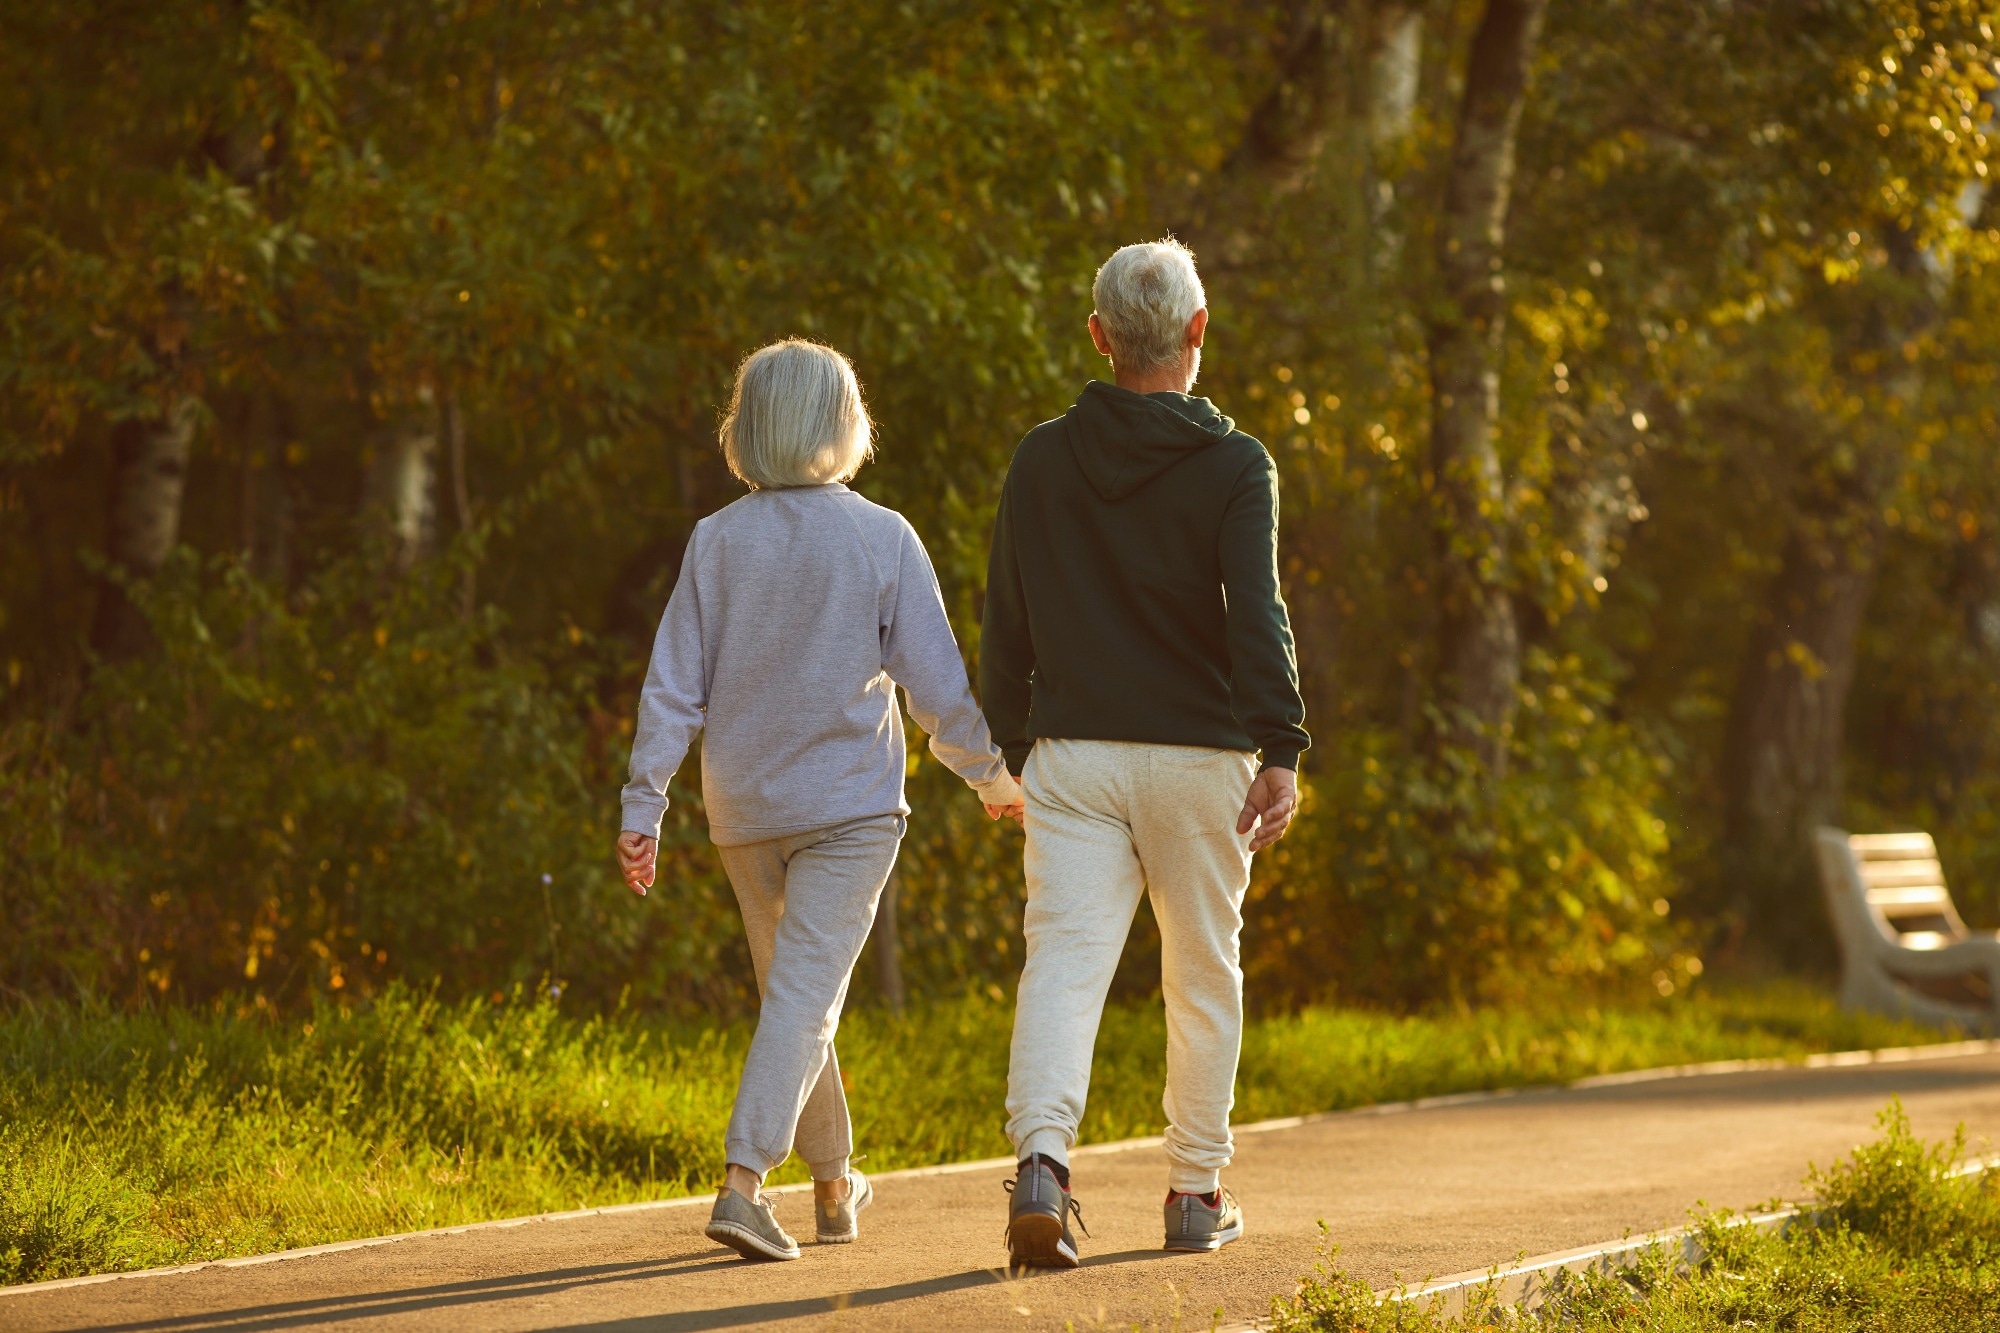 Study: Sedentary Behaviors, Light-Intensity Physical Activity, and Healthy Aging. Image Credit: Studio Romantic / Shutterstock